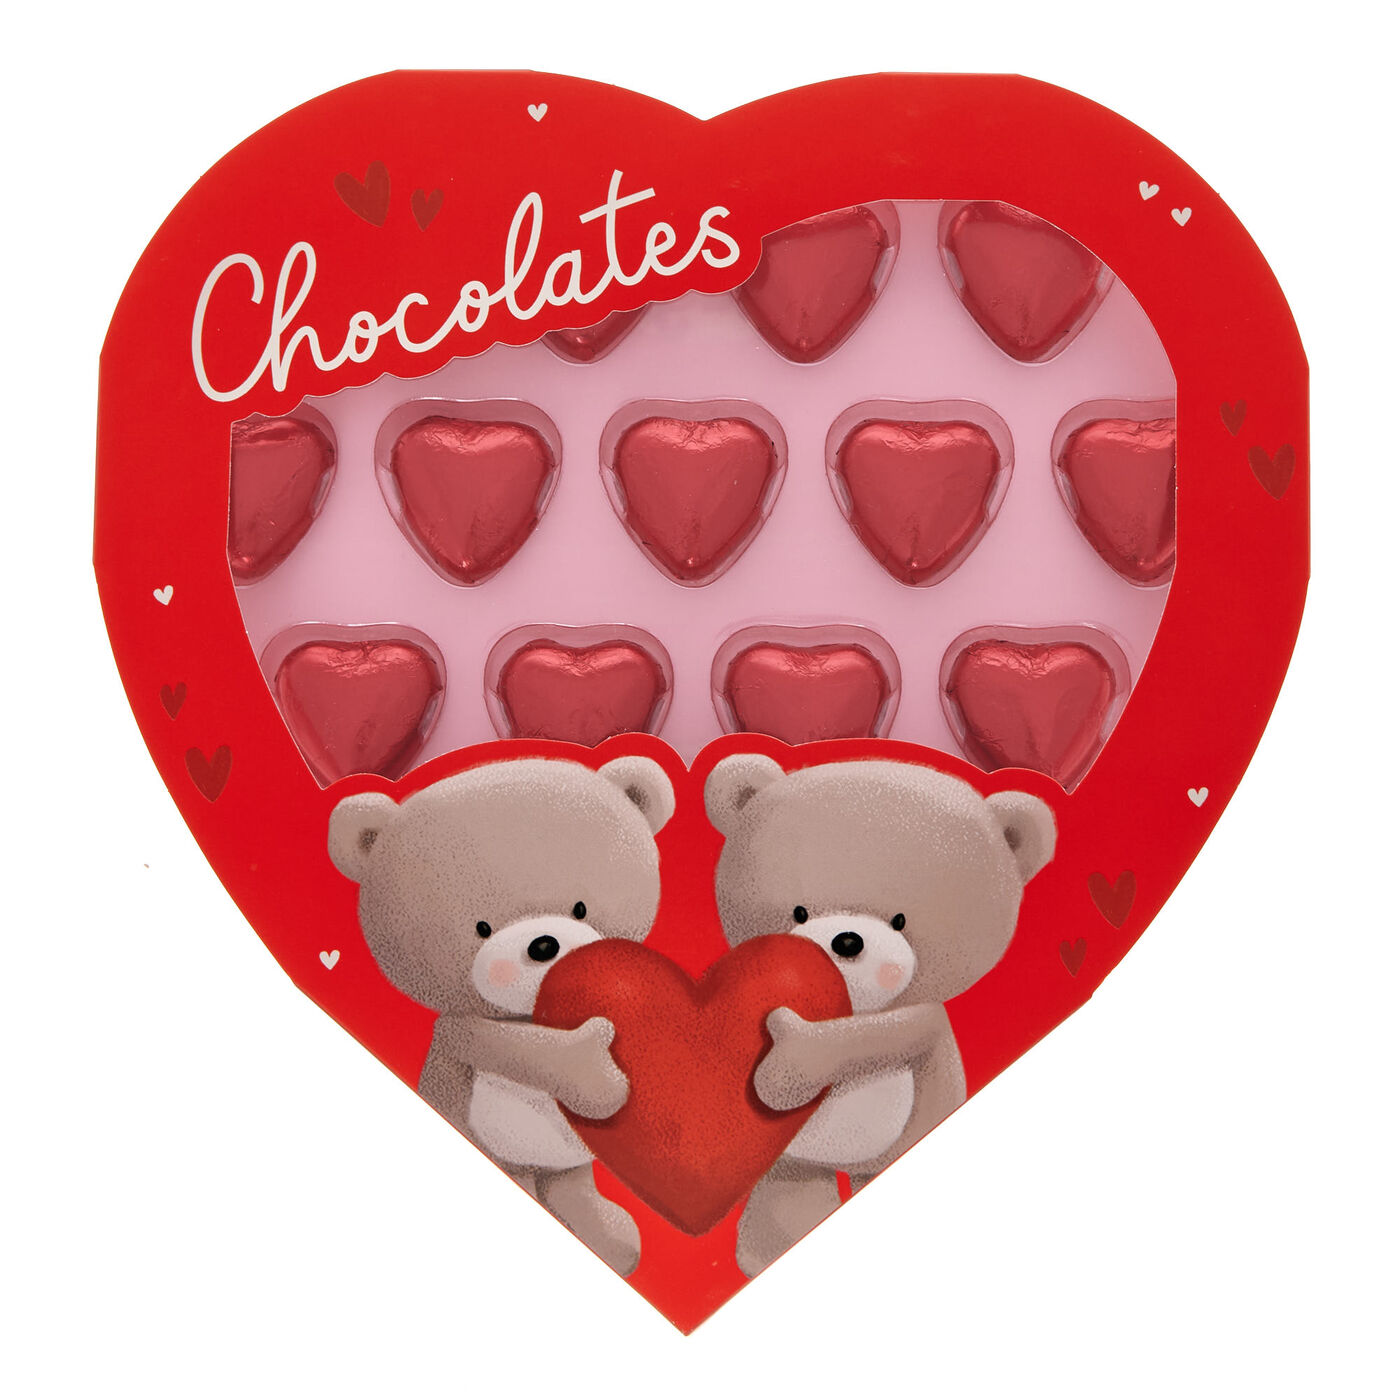 VALENTINES DAY ROMANTIC GIFTS Him & Her Love Heart Cute Bears Valentine Gift  UK